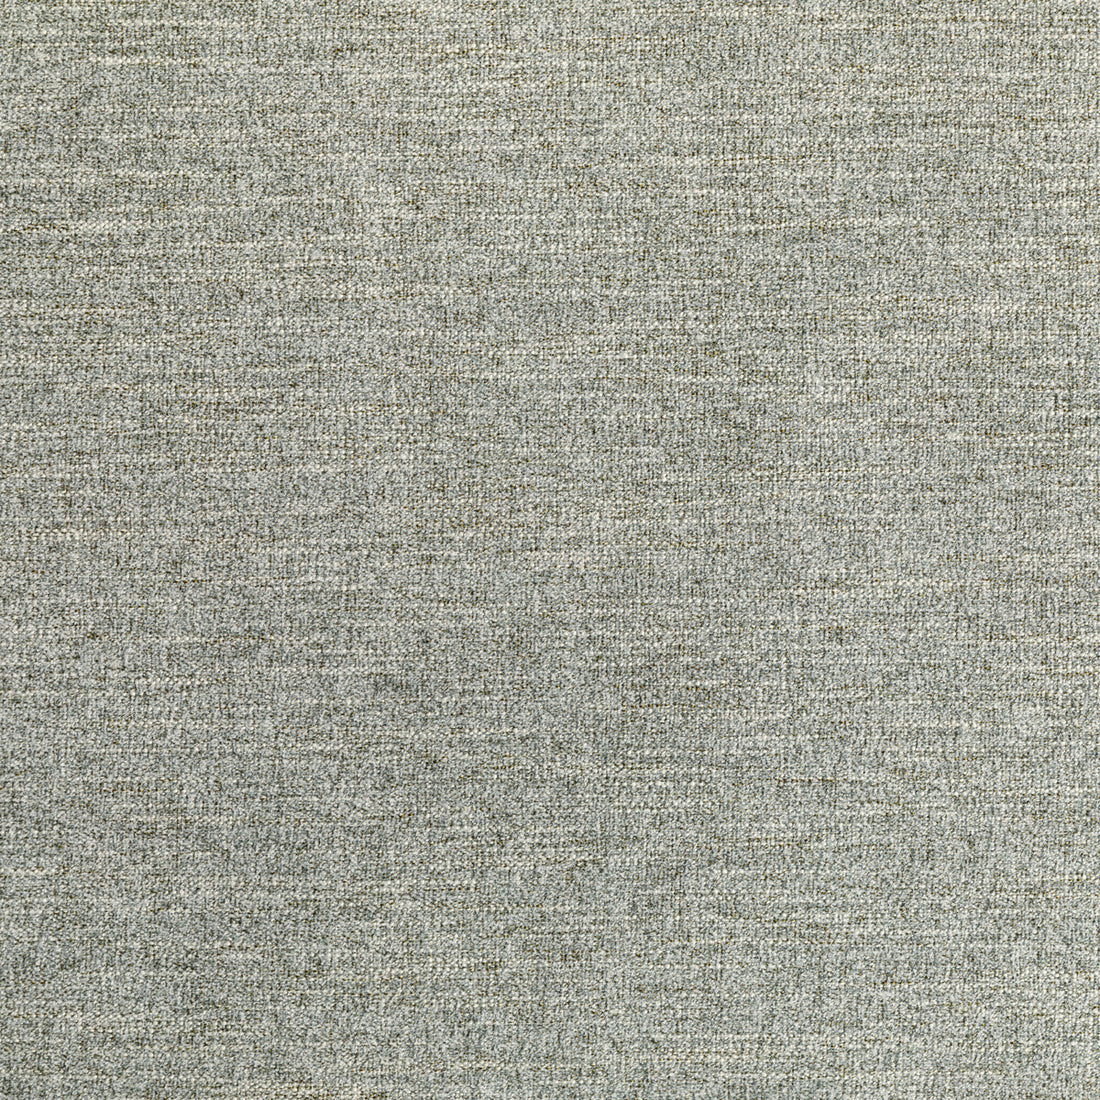 Kravet Smart fabric in 36292-11 color - pattern 36292.11.0 - by Kravet Smart in the Performance Crypton Home collection